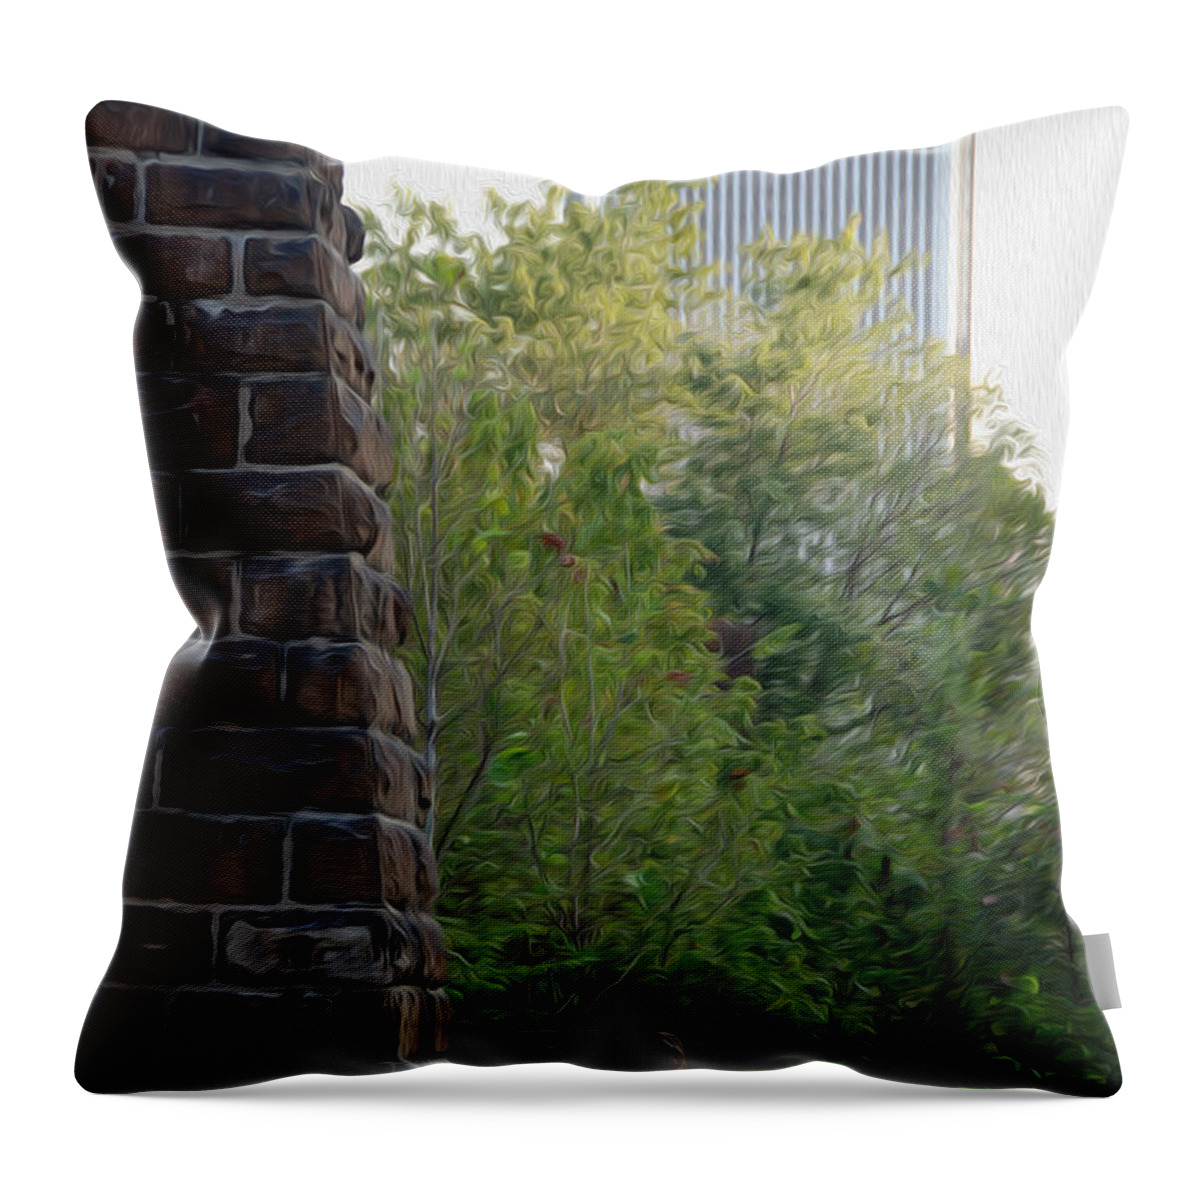 Historic Throw Pillow featuring the digital art Bridge to the Future by Kelvin Booker